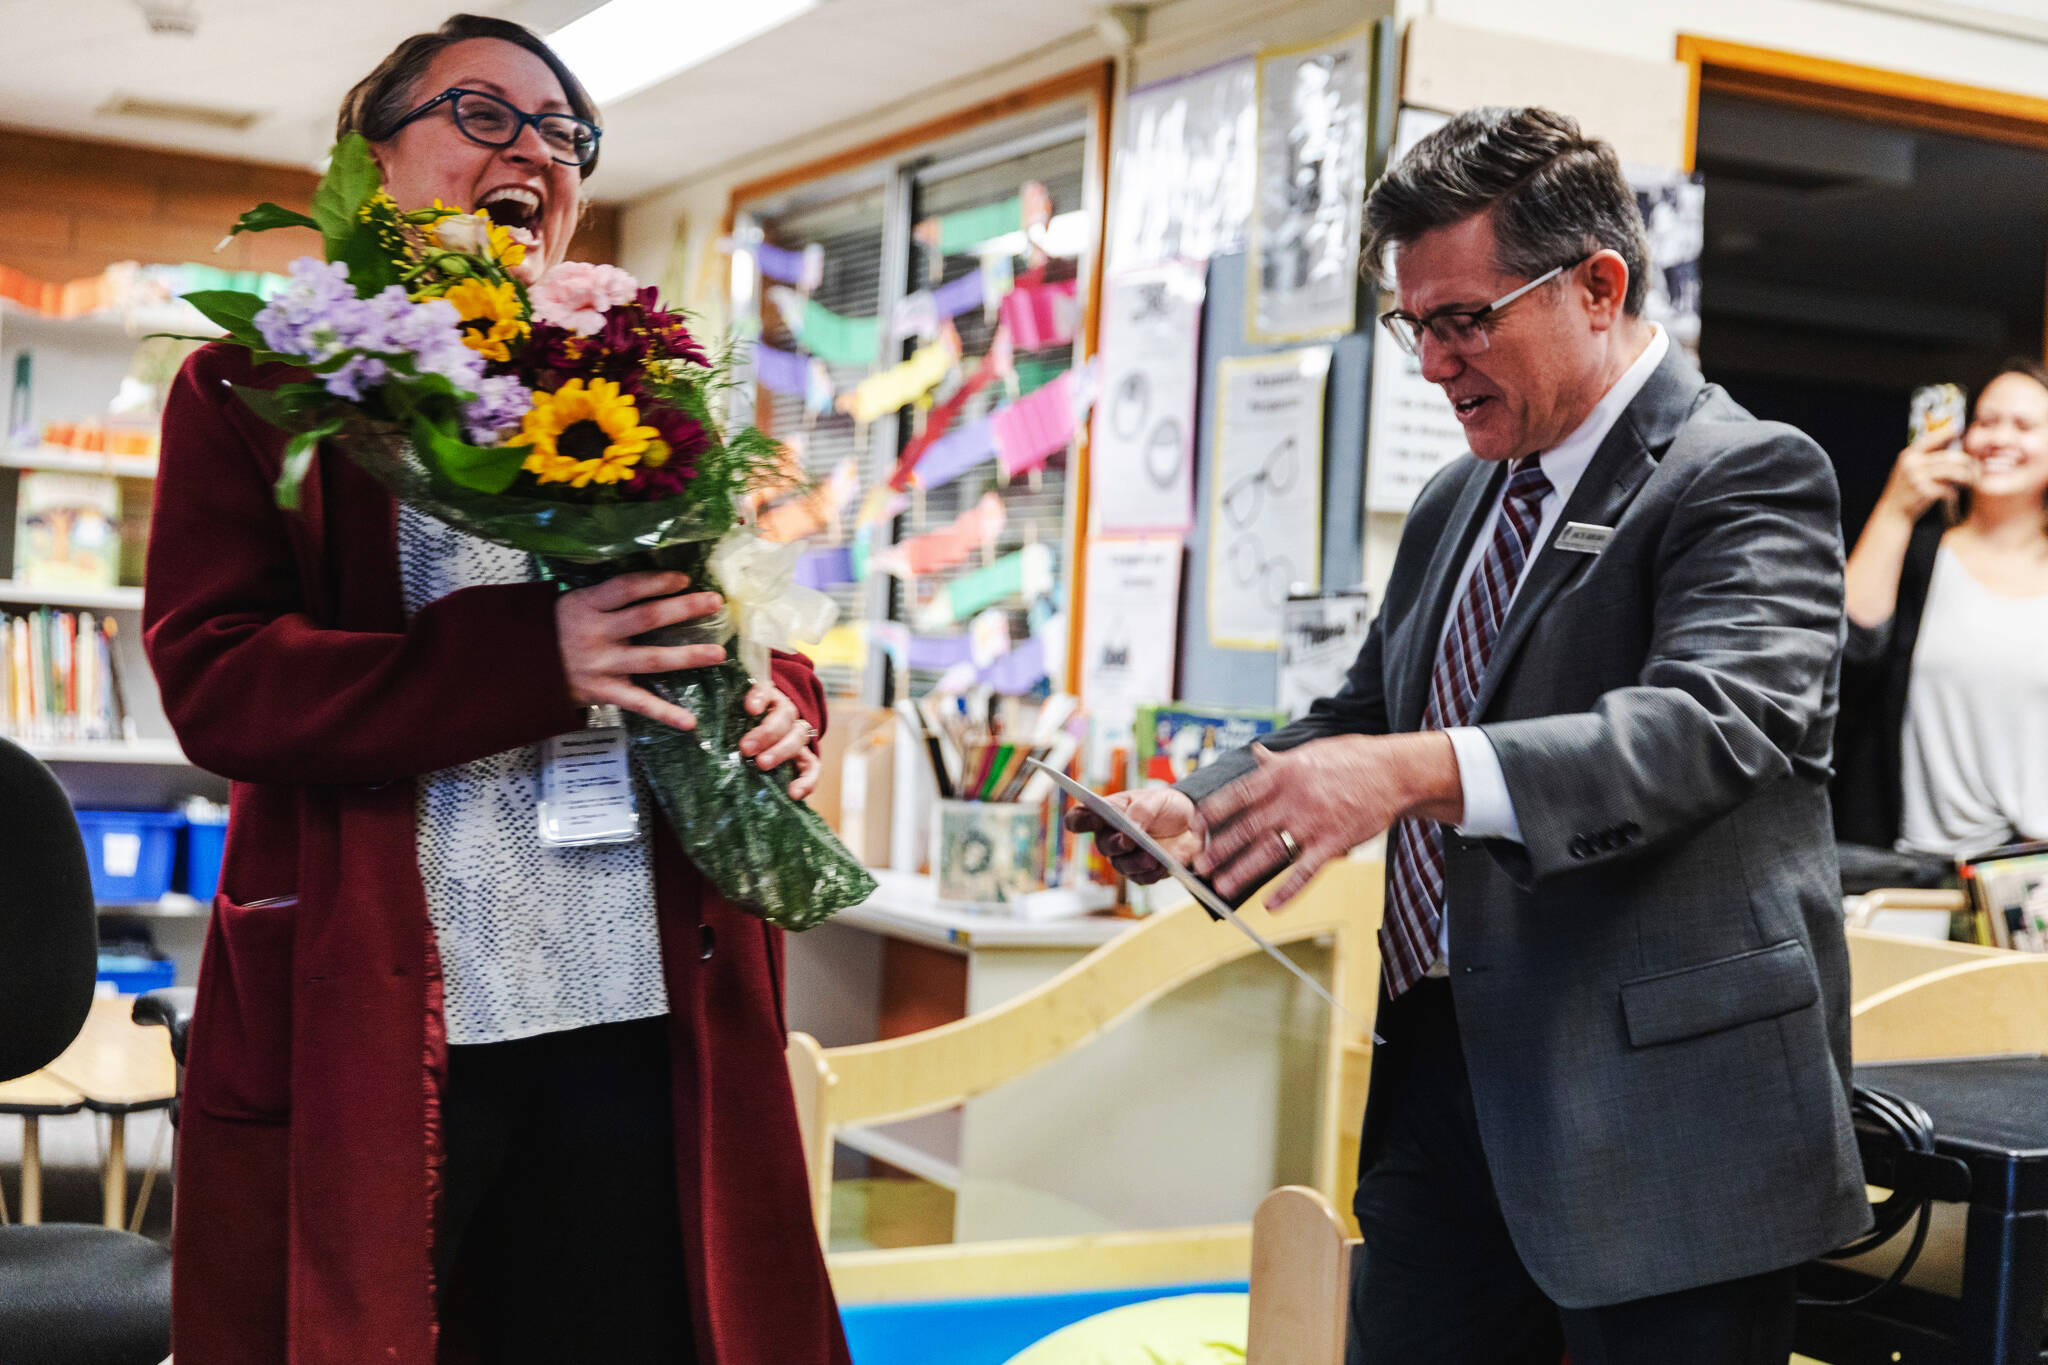 Pine Tree Elementary School Principal Dana Stiner accepts congratulations for state Principal of the Year honors from Jack Arend, deputy director at Association of Washington School Principals. COURTESY PHOTO, Kent School District